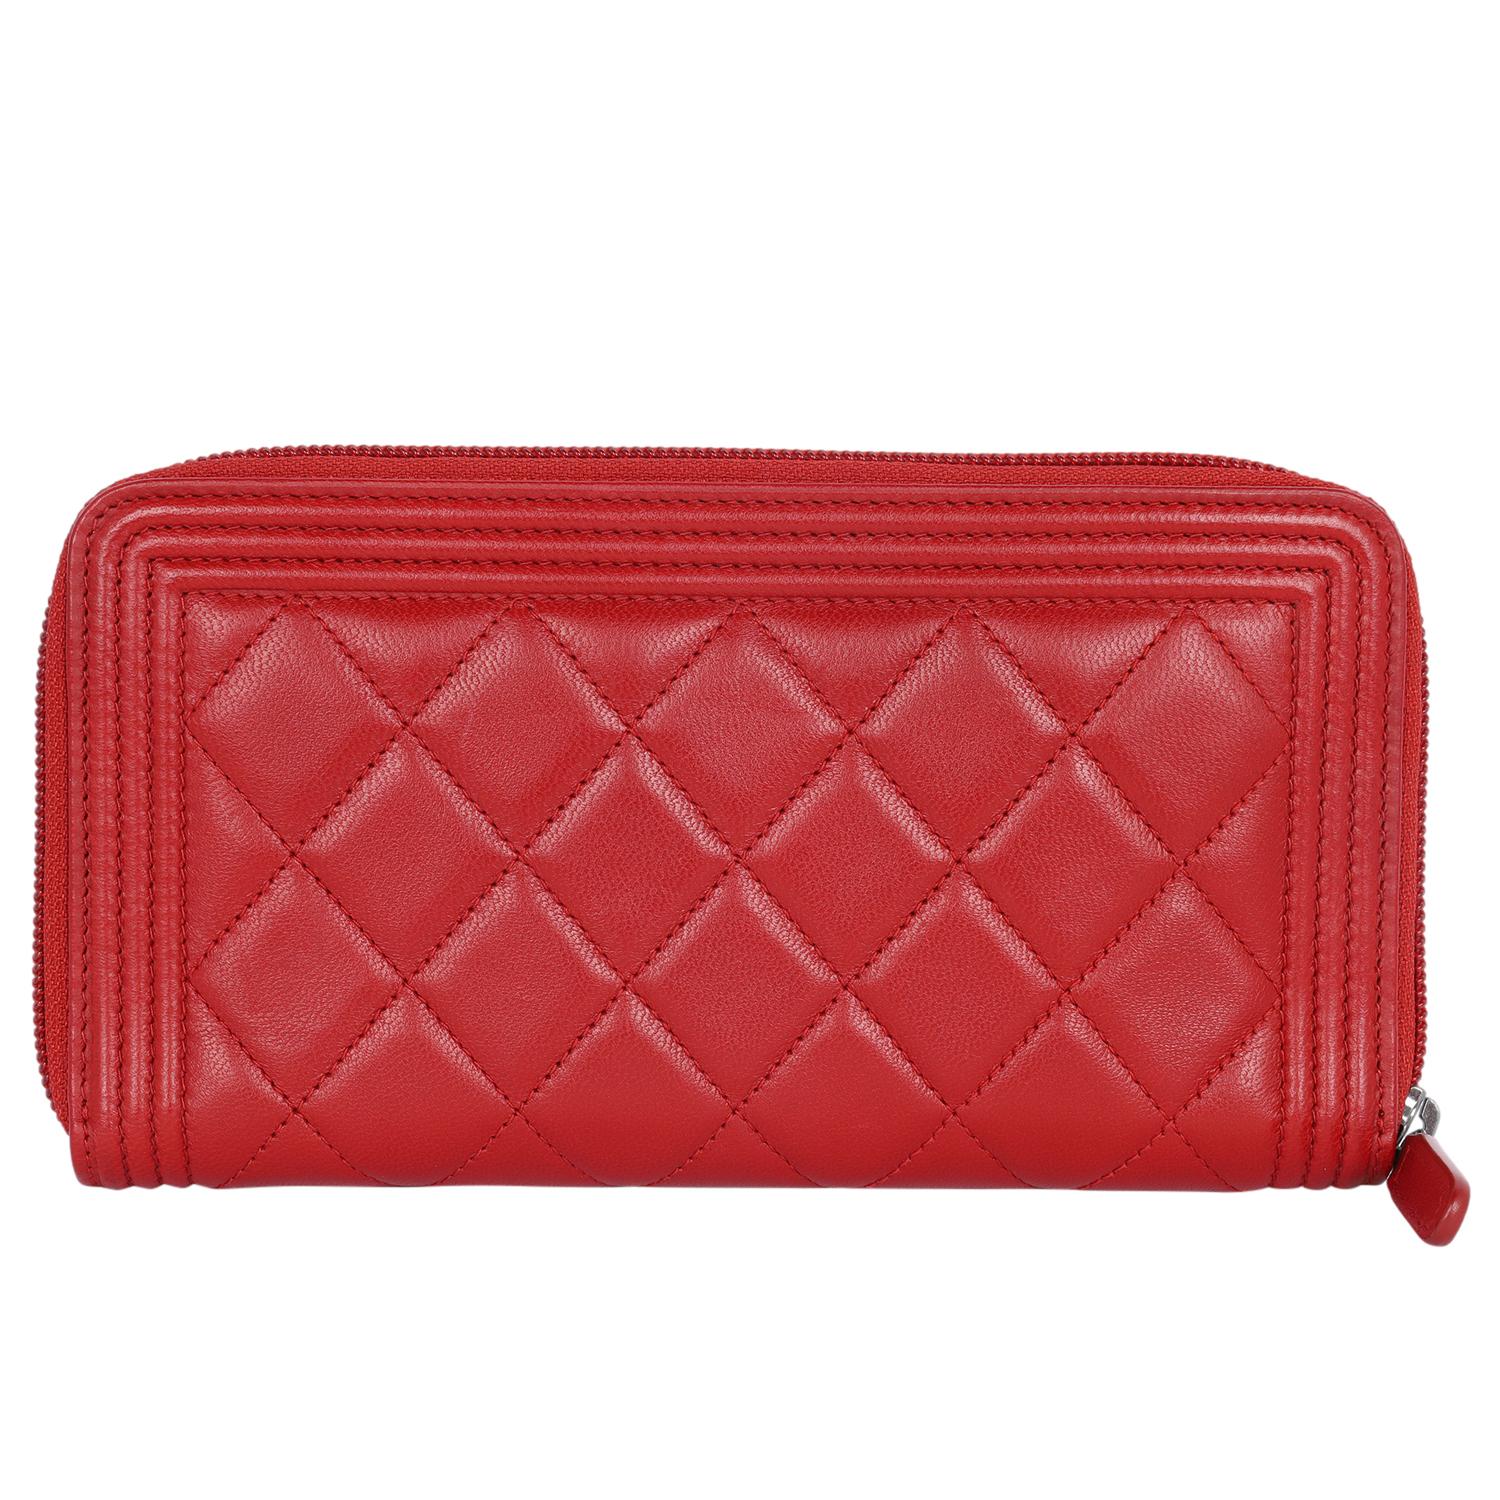 Authentic, pre-owned Chanel boy lambskin diamond quilted wallet in red. Features diamond quilted luxurious red leather with a Chanel CC logo in silver, zip around closure, red pull tab, large interior with  8 cc slots, billfold panel slots, long